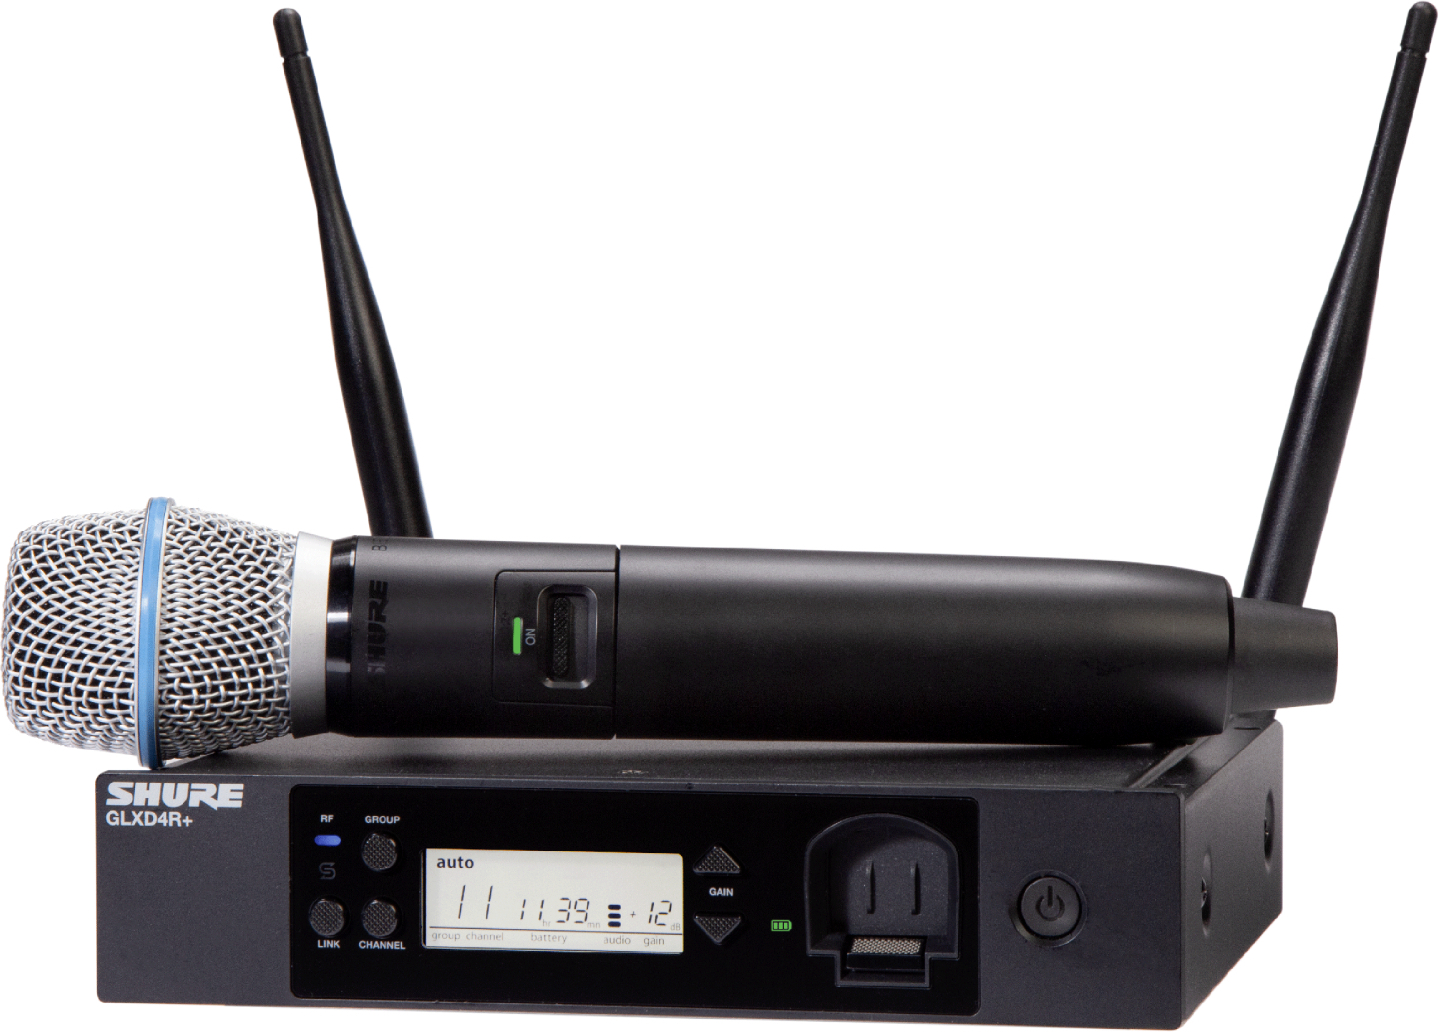 Shure Glxd24r+/b87a/z4 - Wireless handheld microphone - Main picture